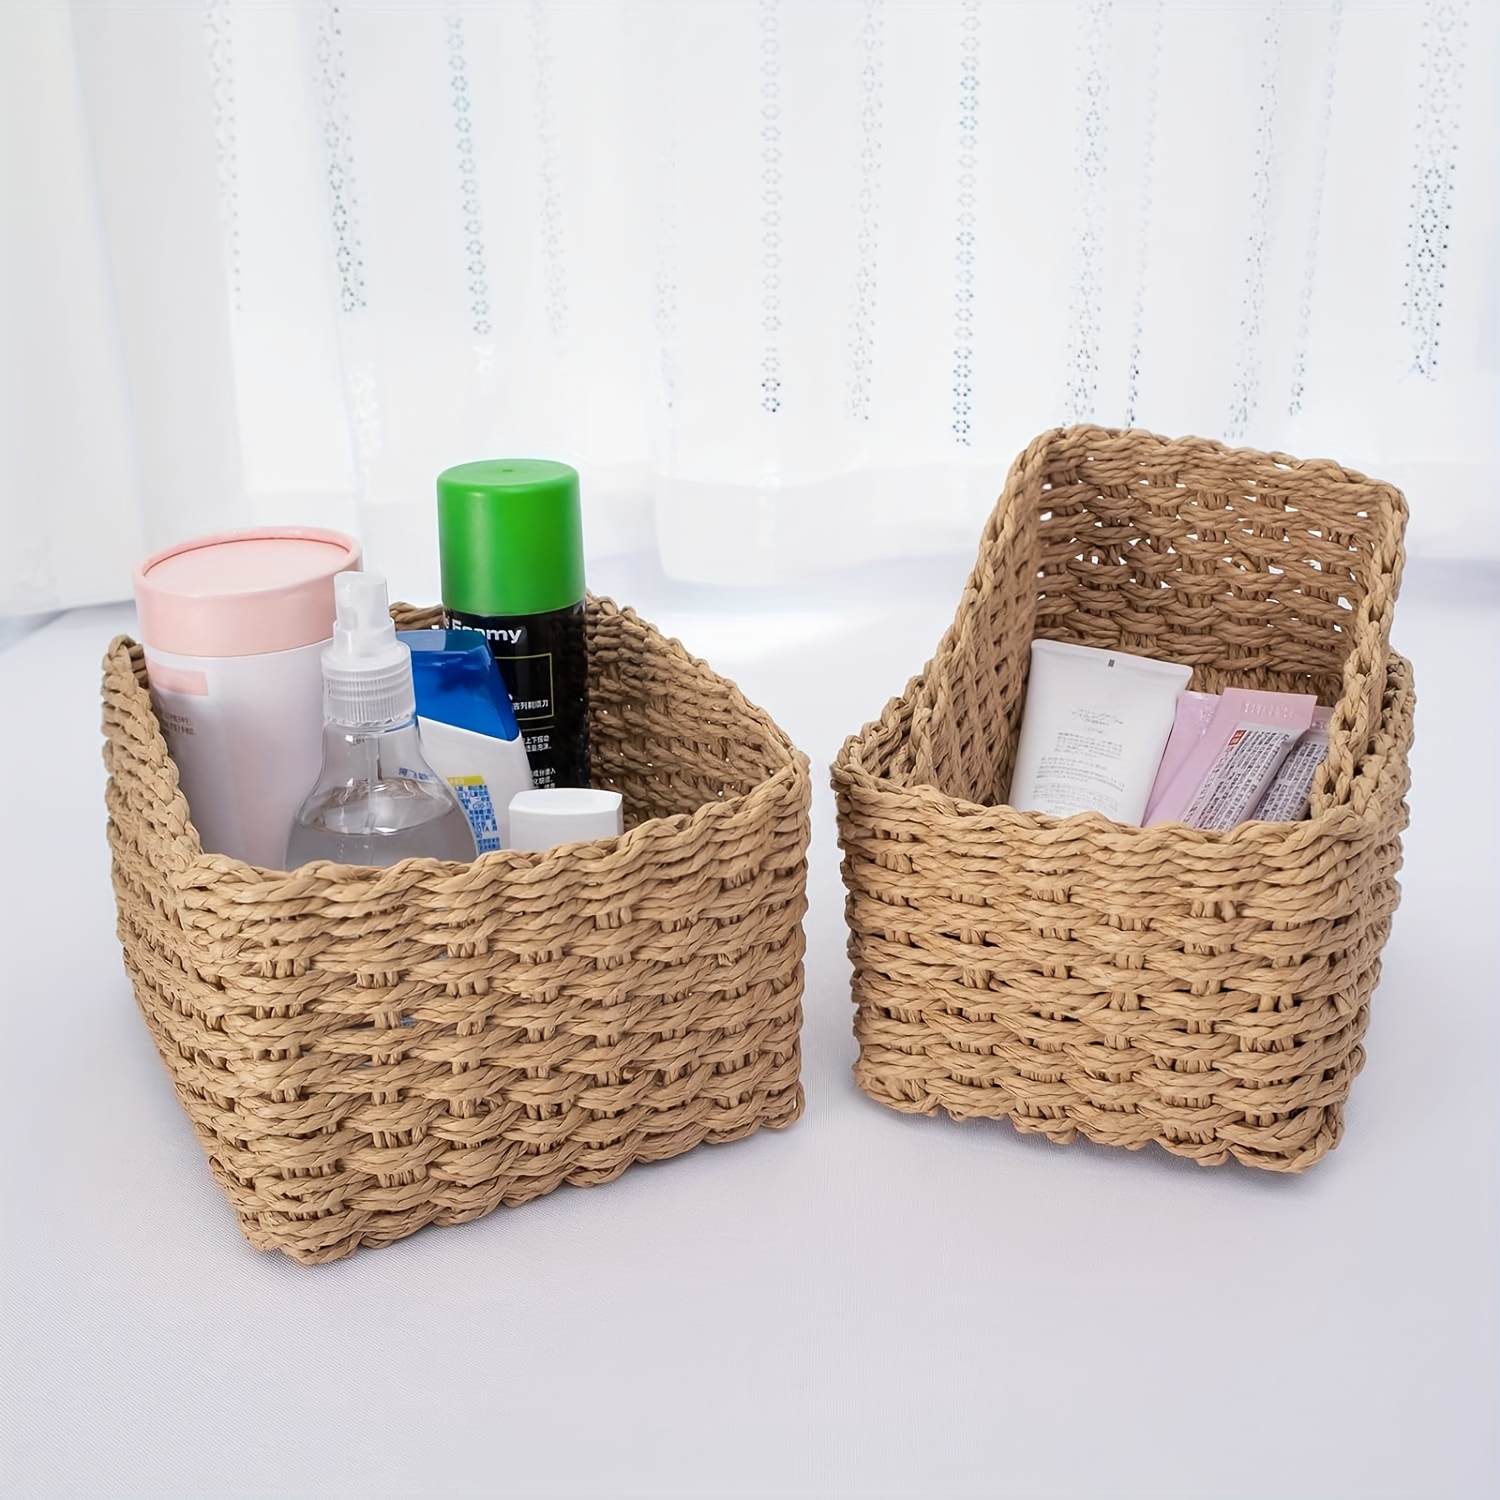 Woven Storage Baskets For Organizing, Storage Container For